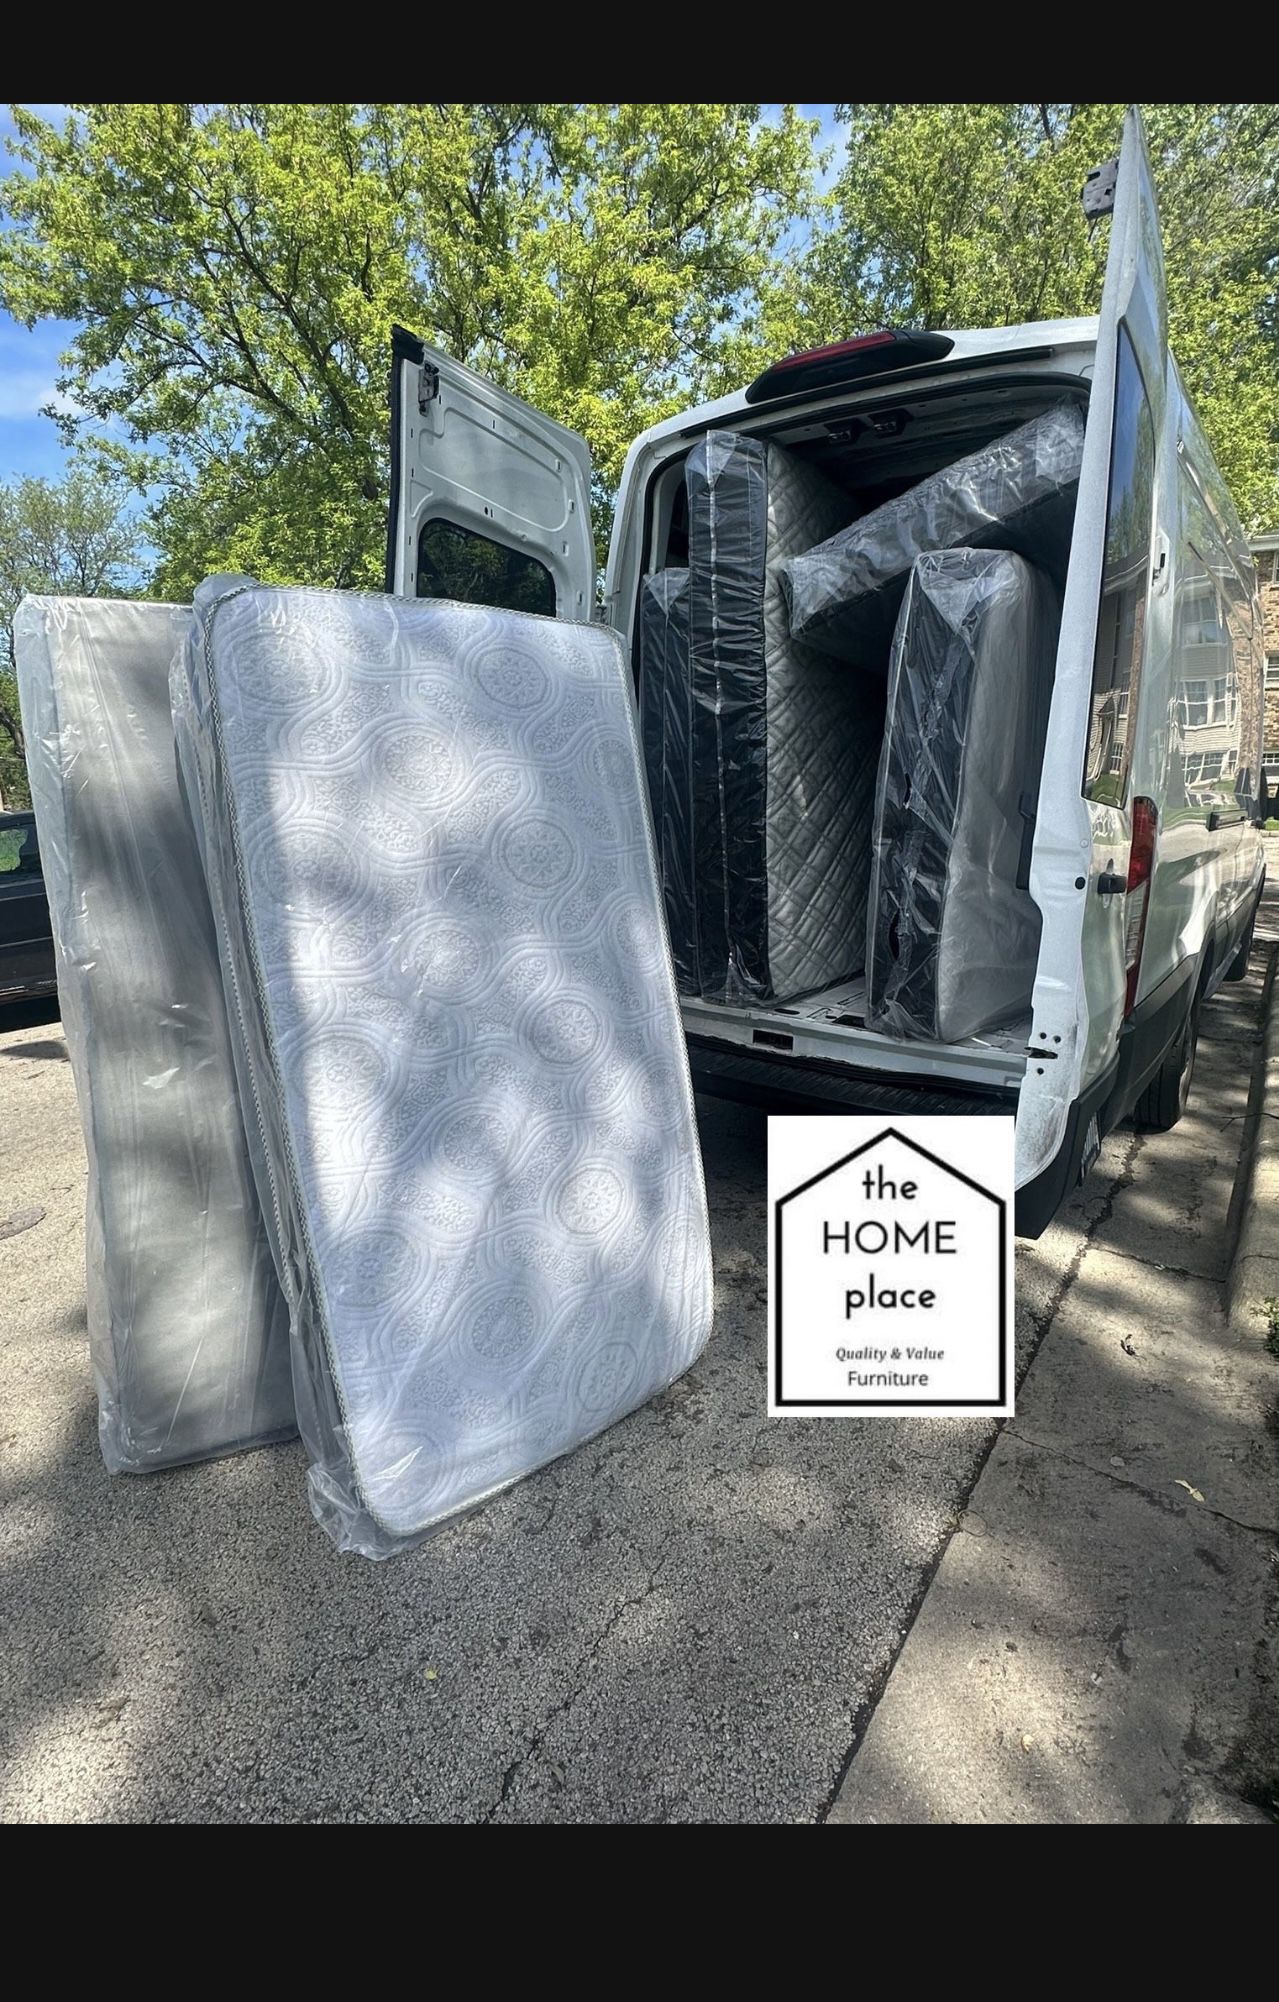 Brand New Mattress Sale 🚨 Starting At ONLY $99 🚨 Ready For Delivery TODAY 🚛